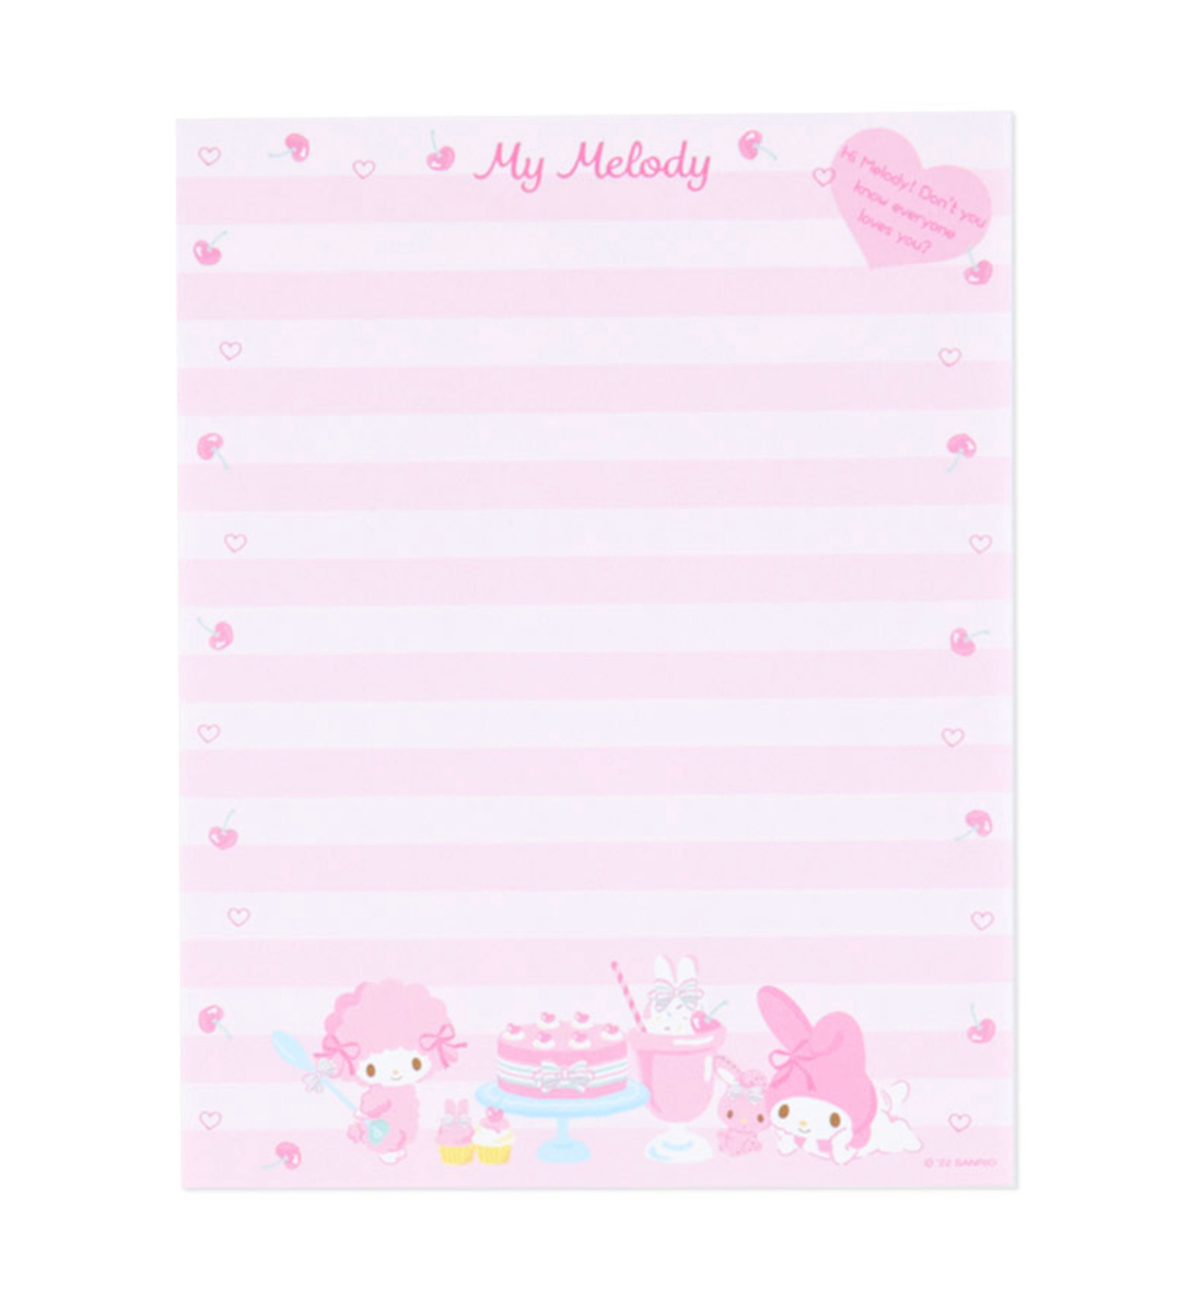 Sanrio My Melody Letter Set [Side by Side]